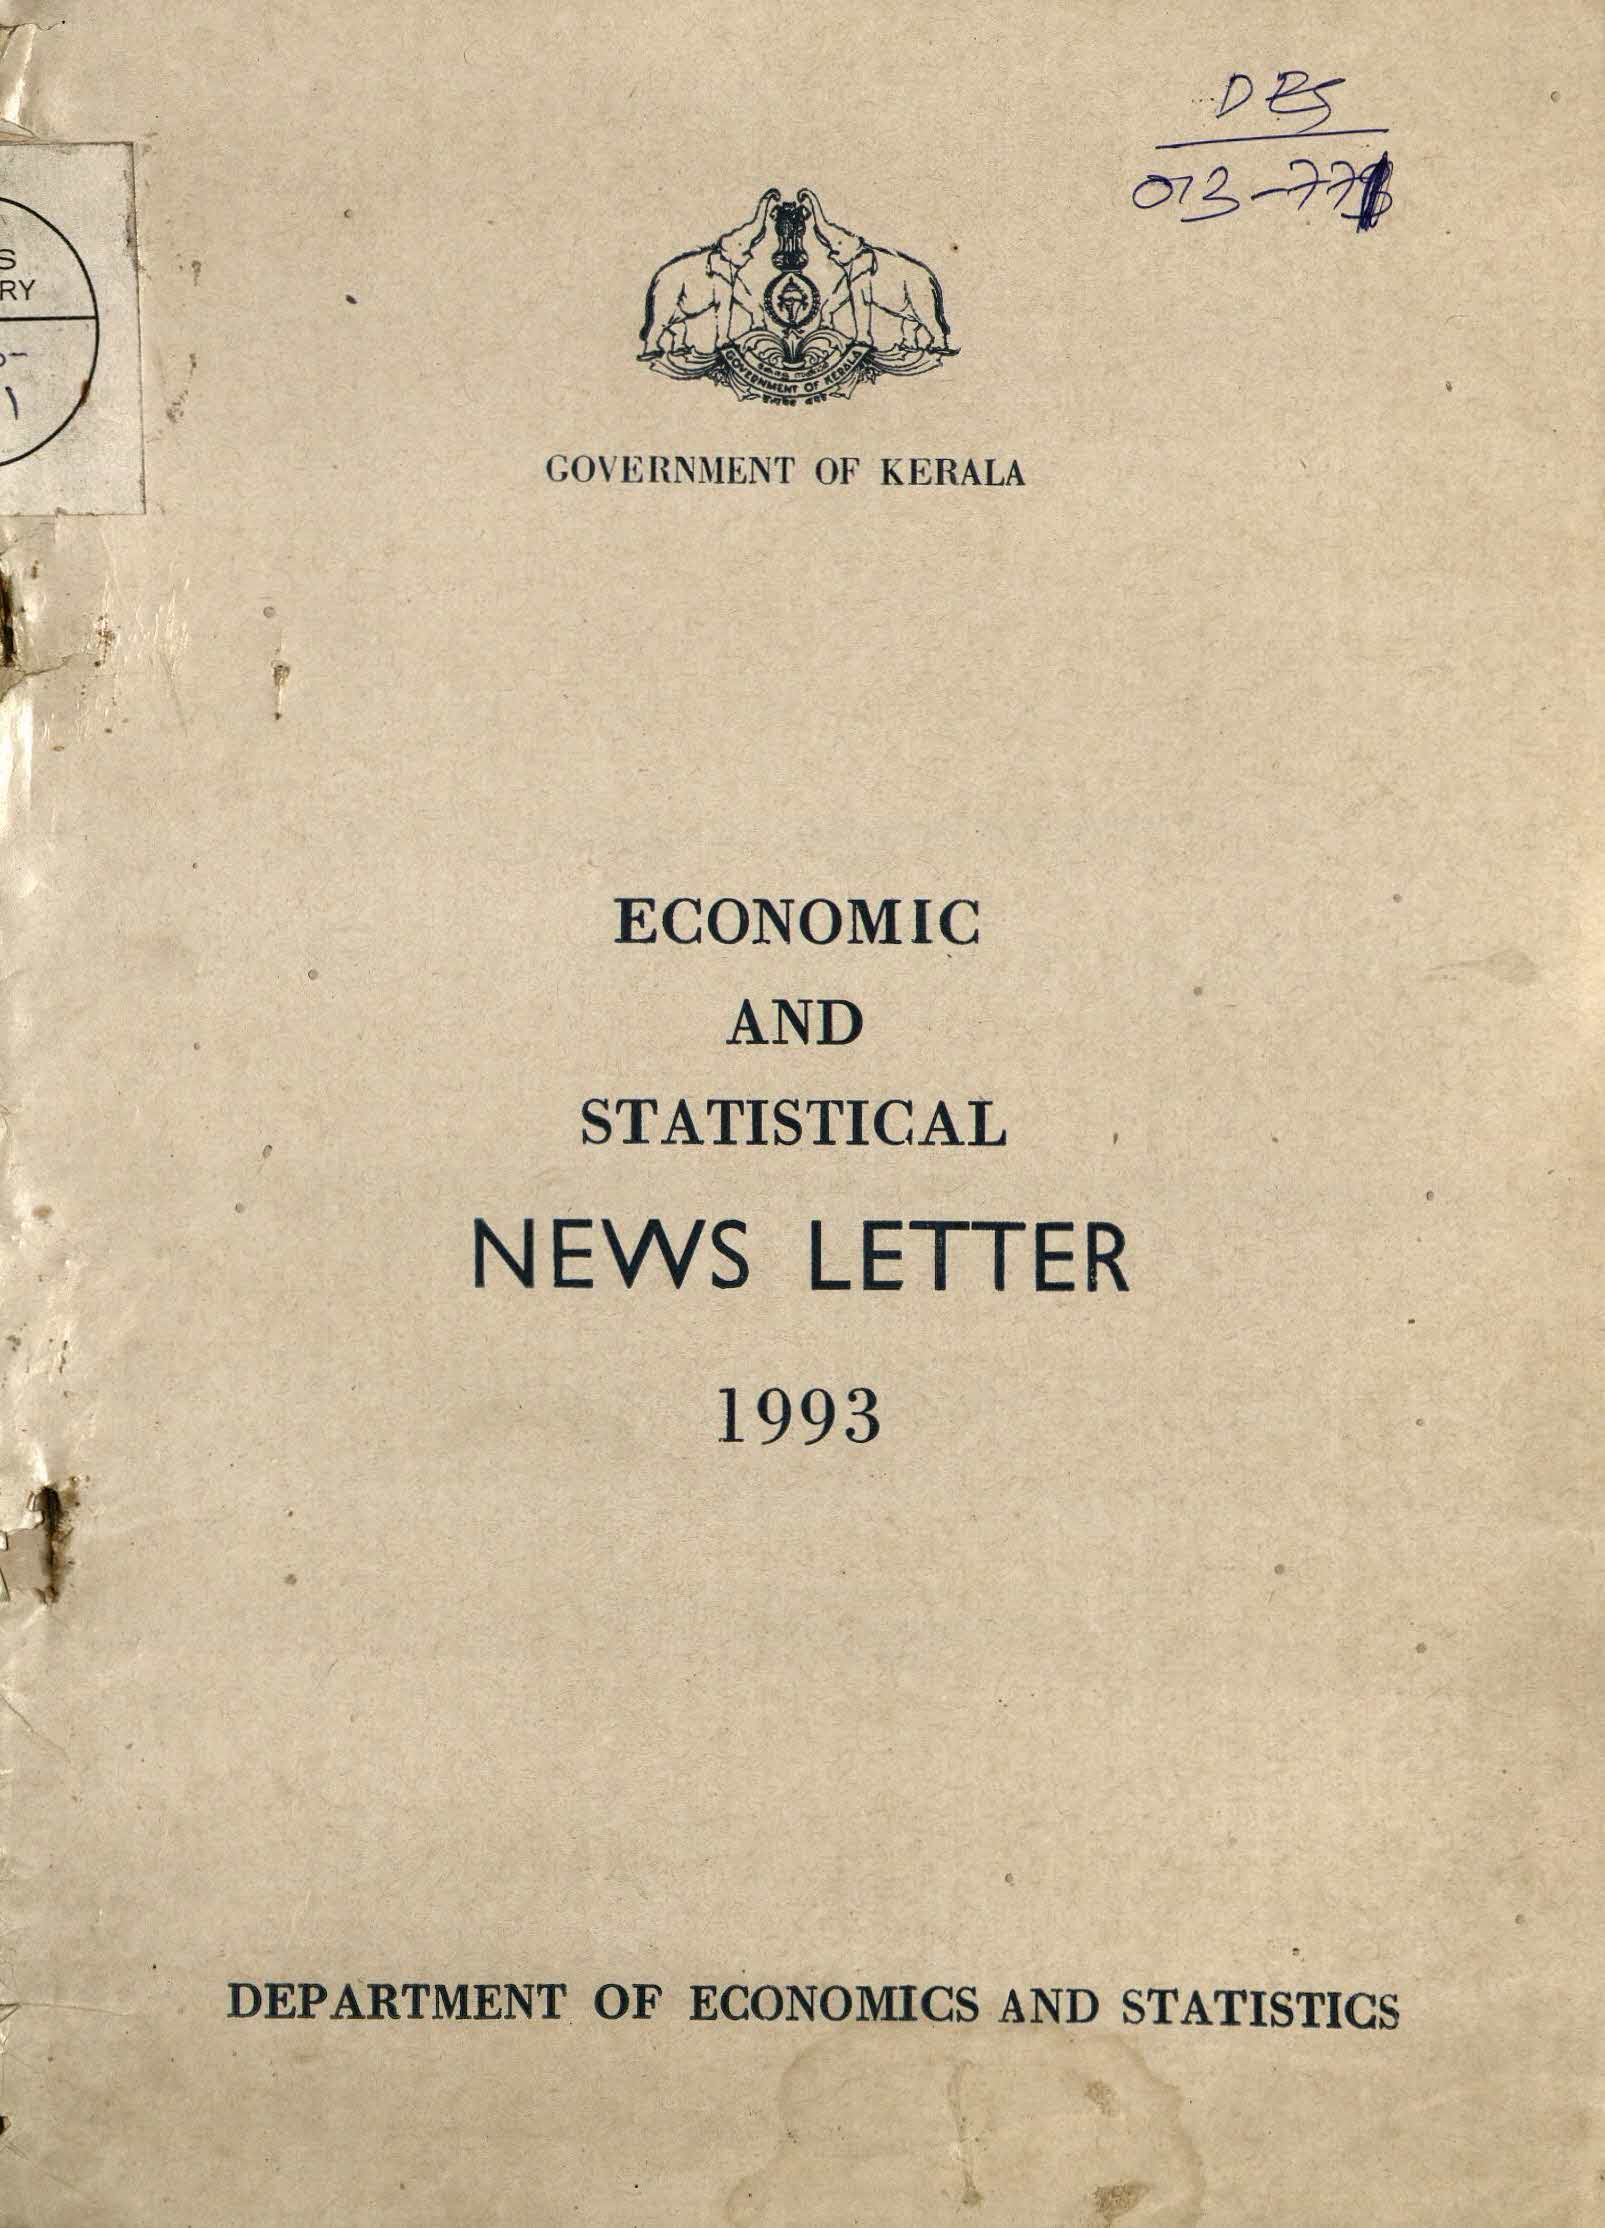 Economic And Statistical News Letter 1993